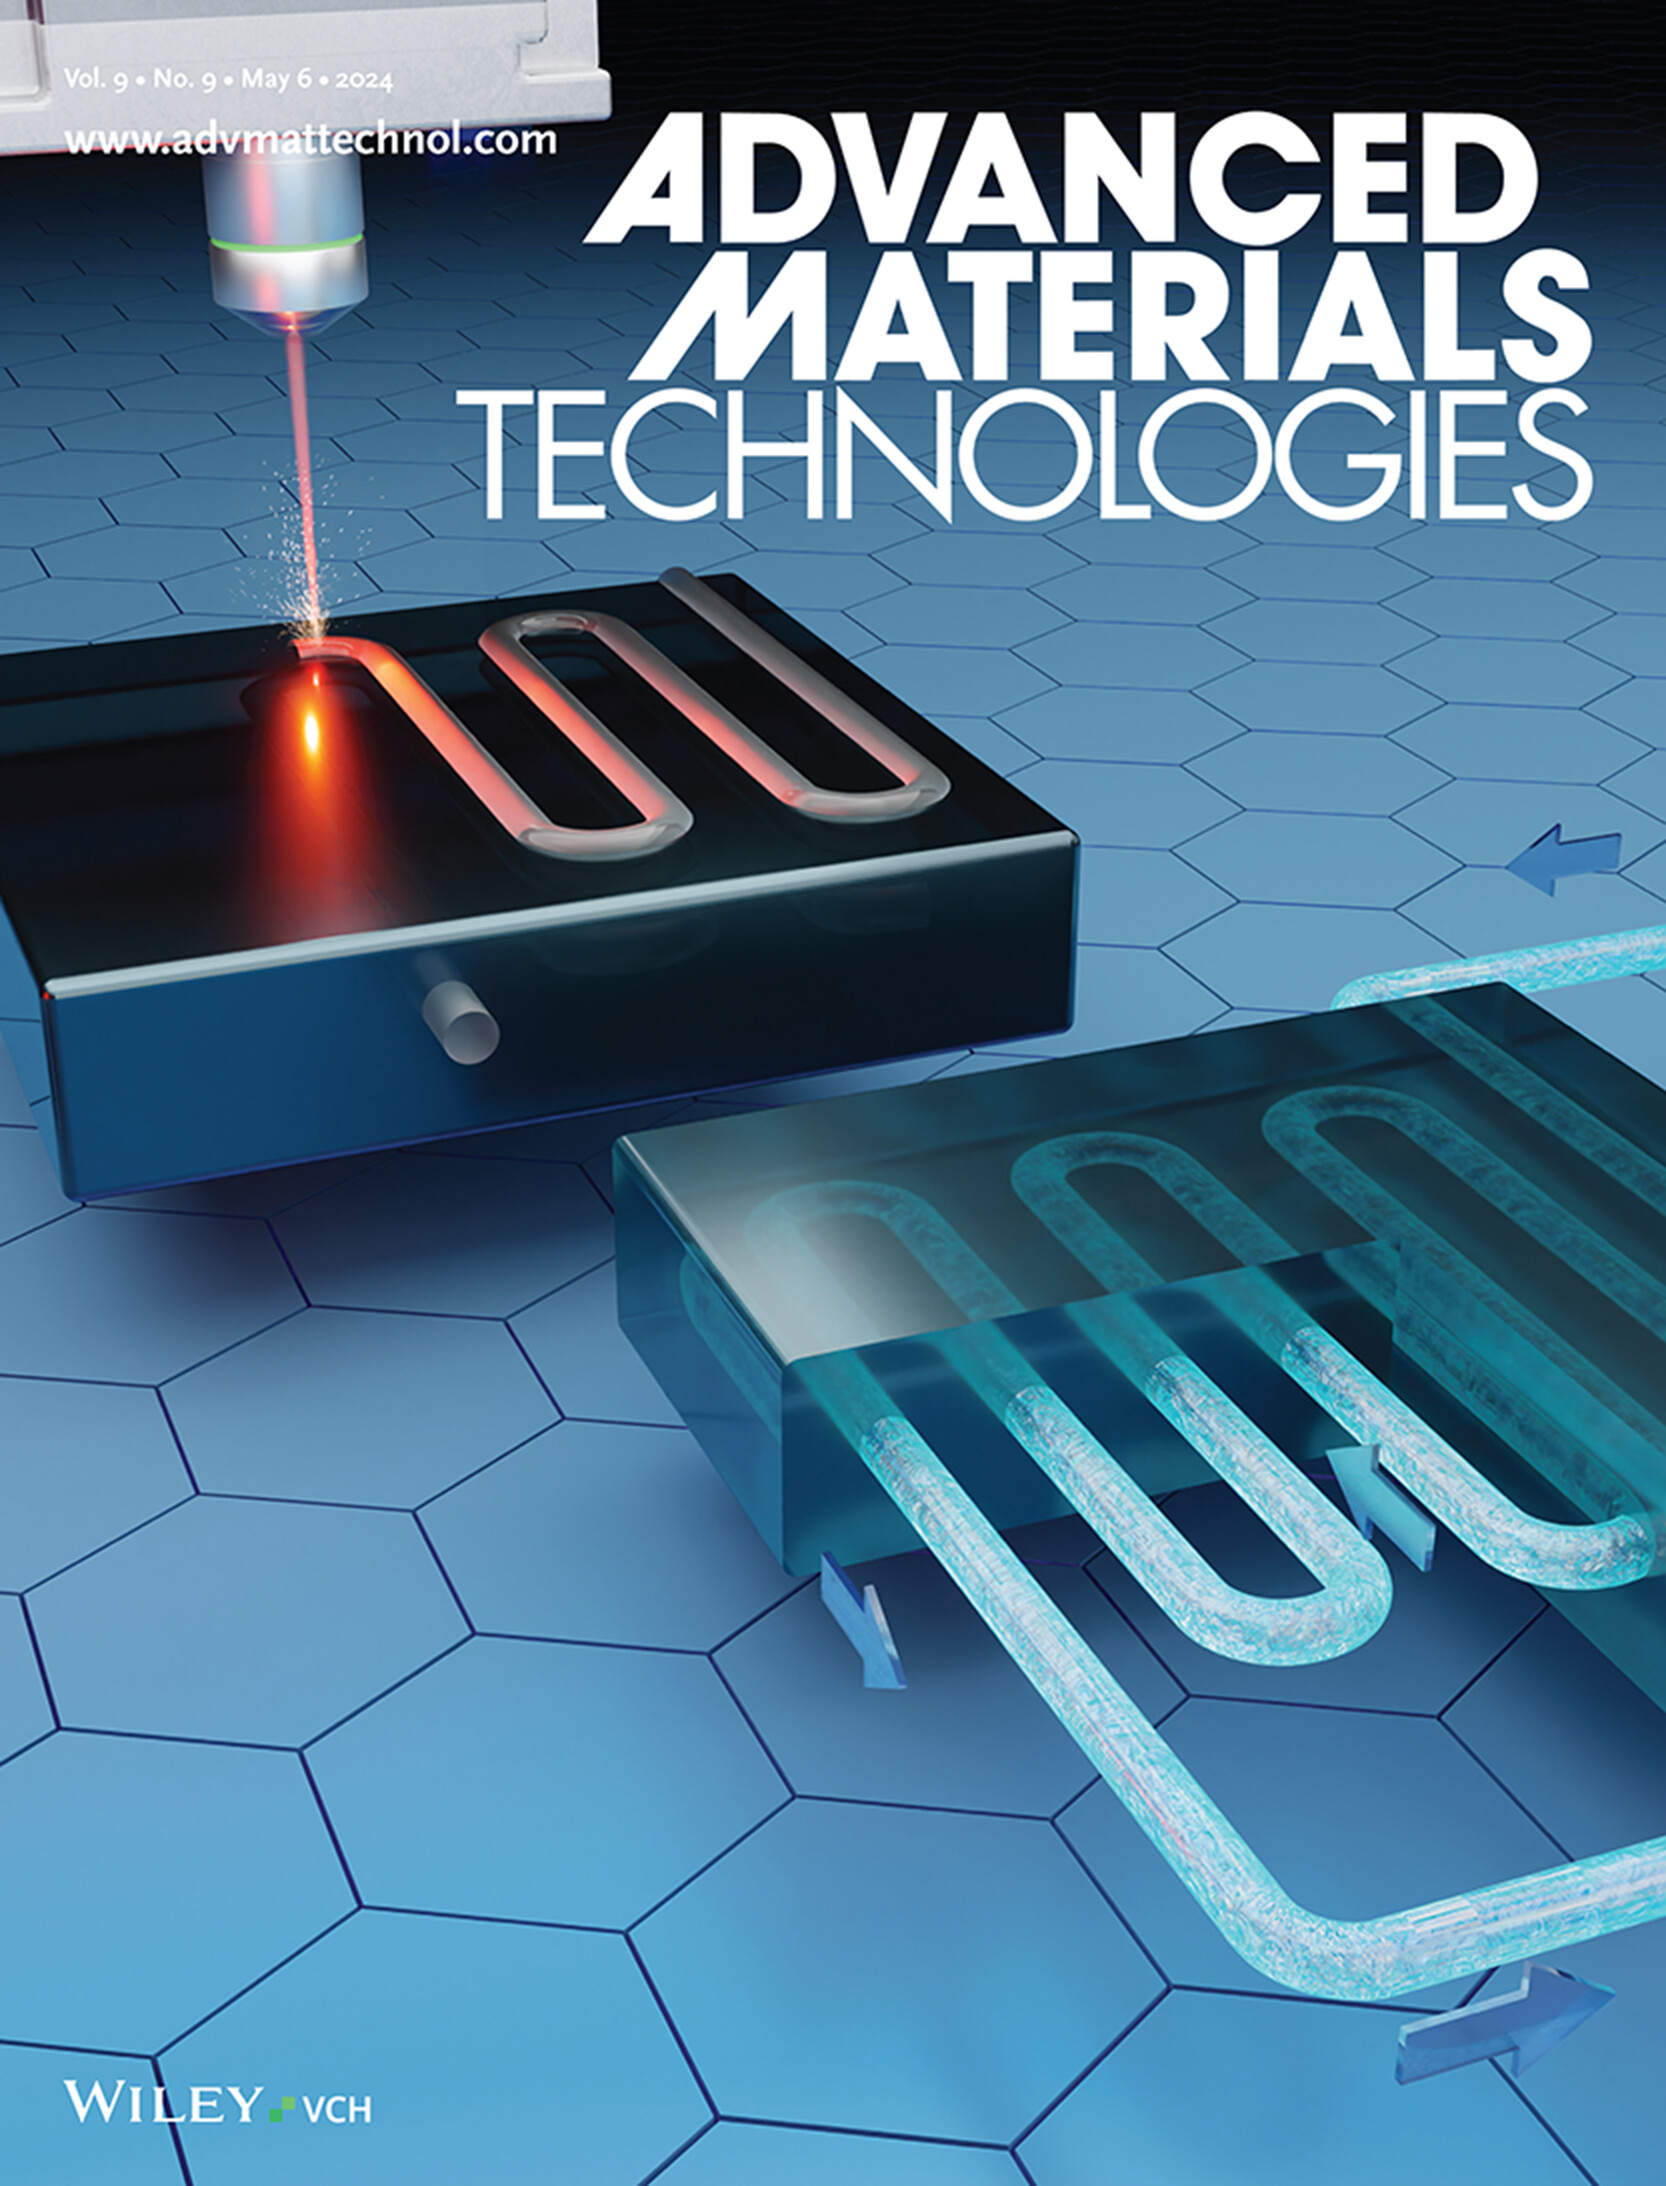 Dr. Onur Tokel’s research is highlighted on the Back Cover of Advanced Materials Technologies